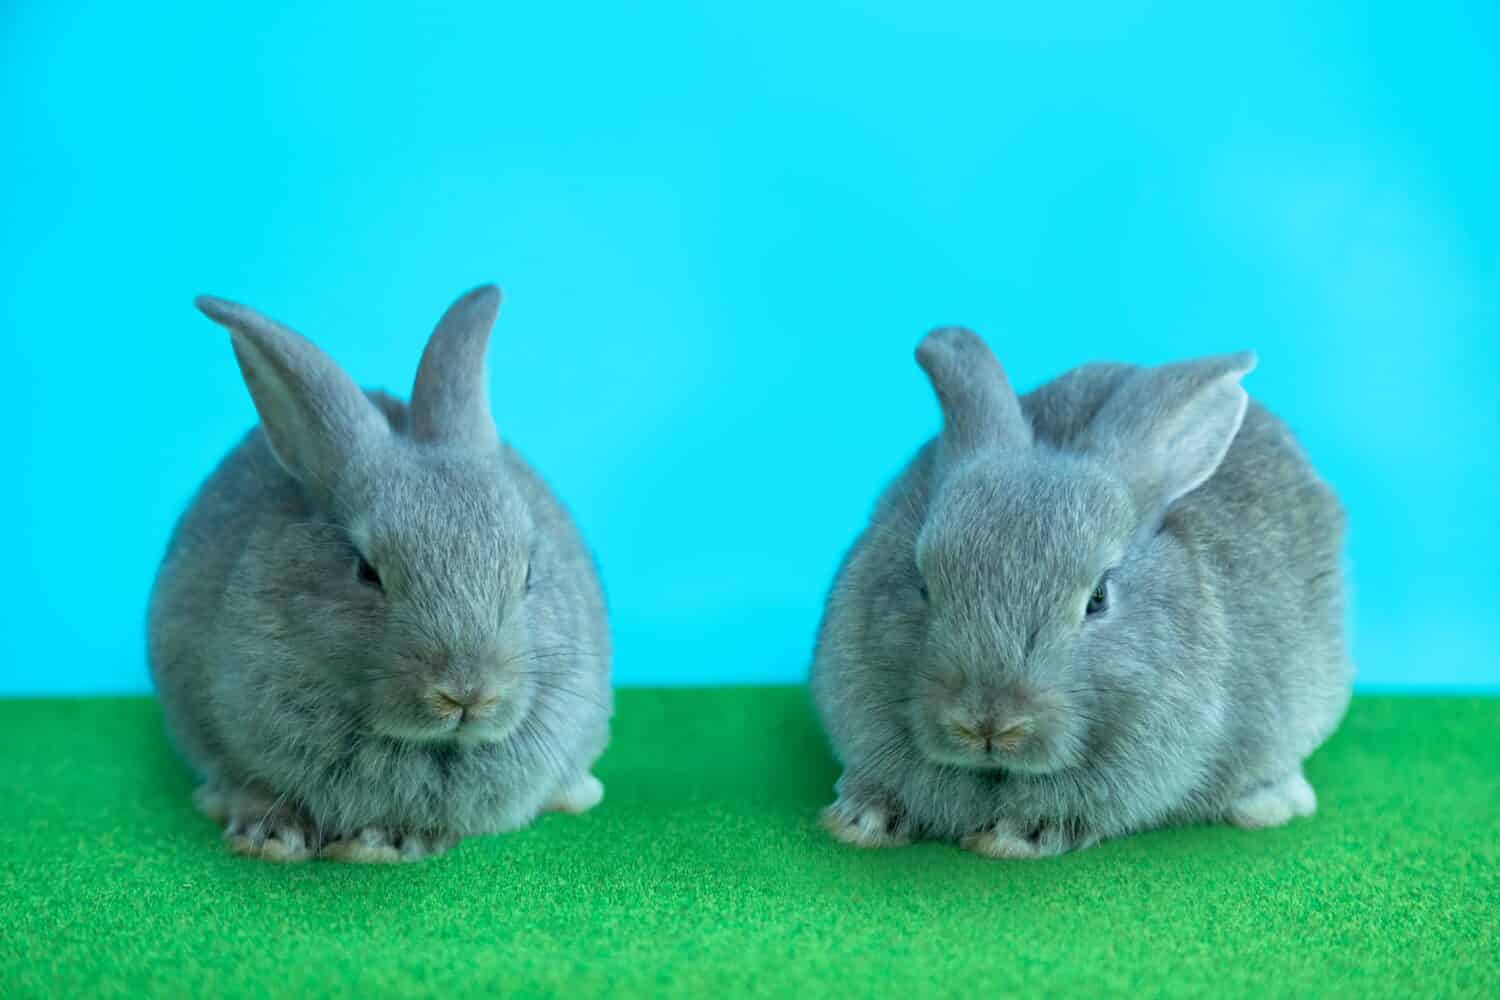 Two gray young adorable bunny sitting on green grass and blue background. Cute baby Netherlands Dwaf and Holland lops rabbit for Easter celebration